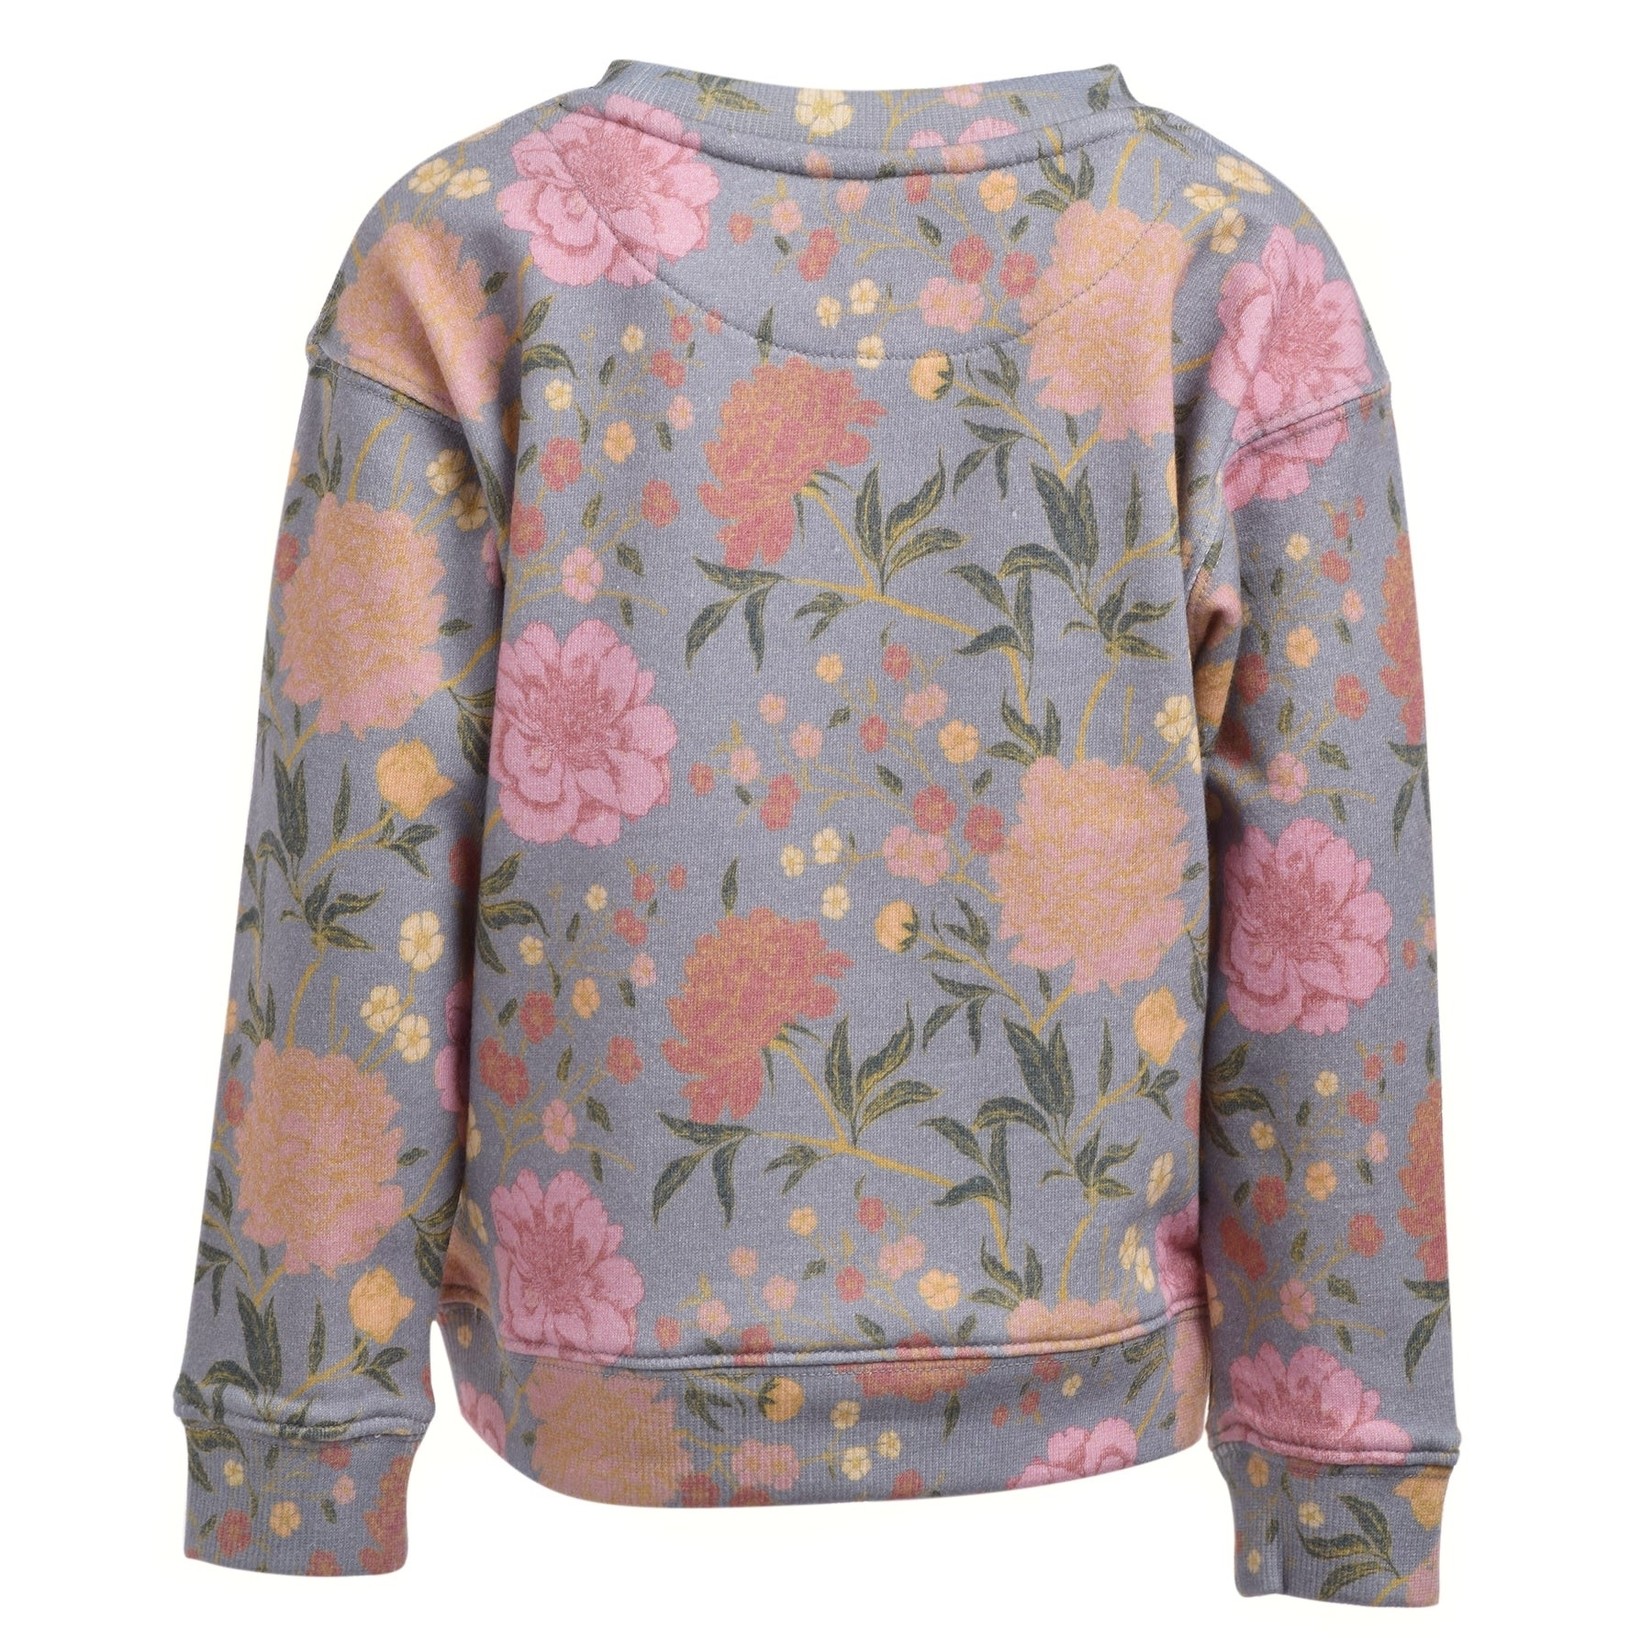 L&P L&P - French Terry Crewneck Sweater 'Indiana 2.0 - Grey/Vintage Flowers'